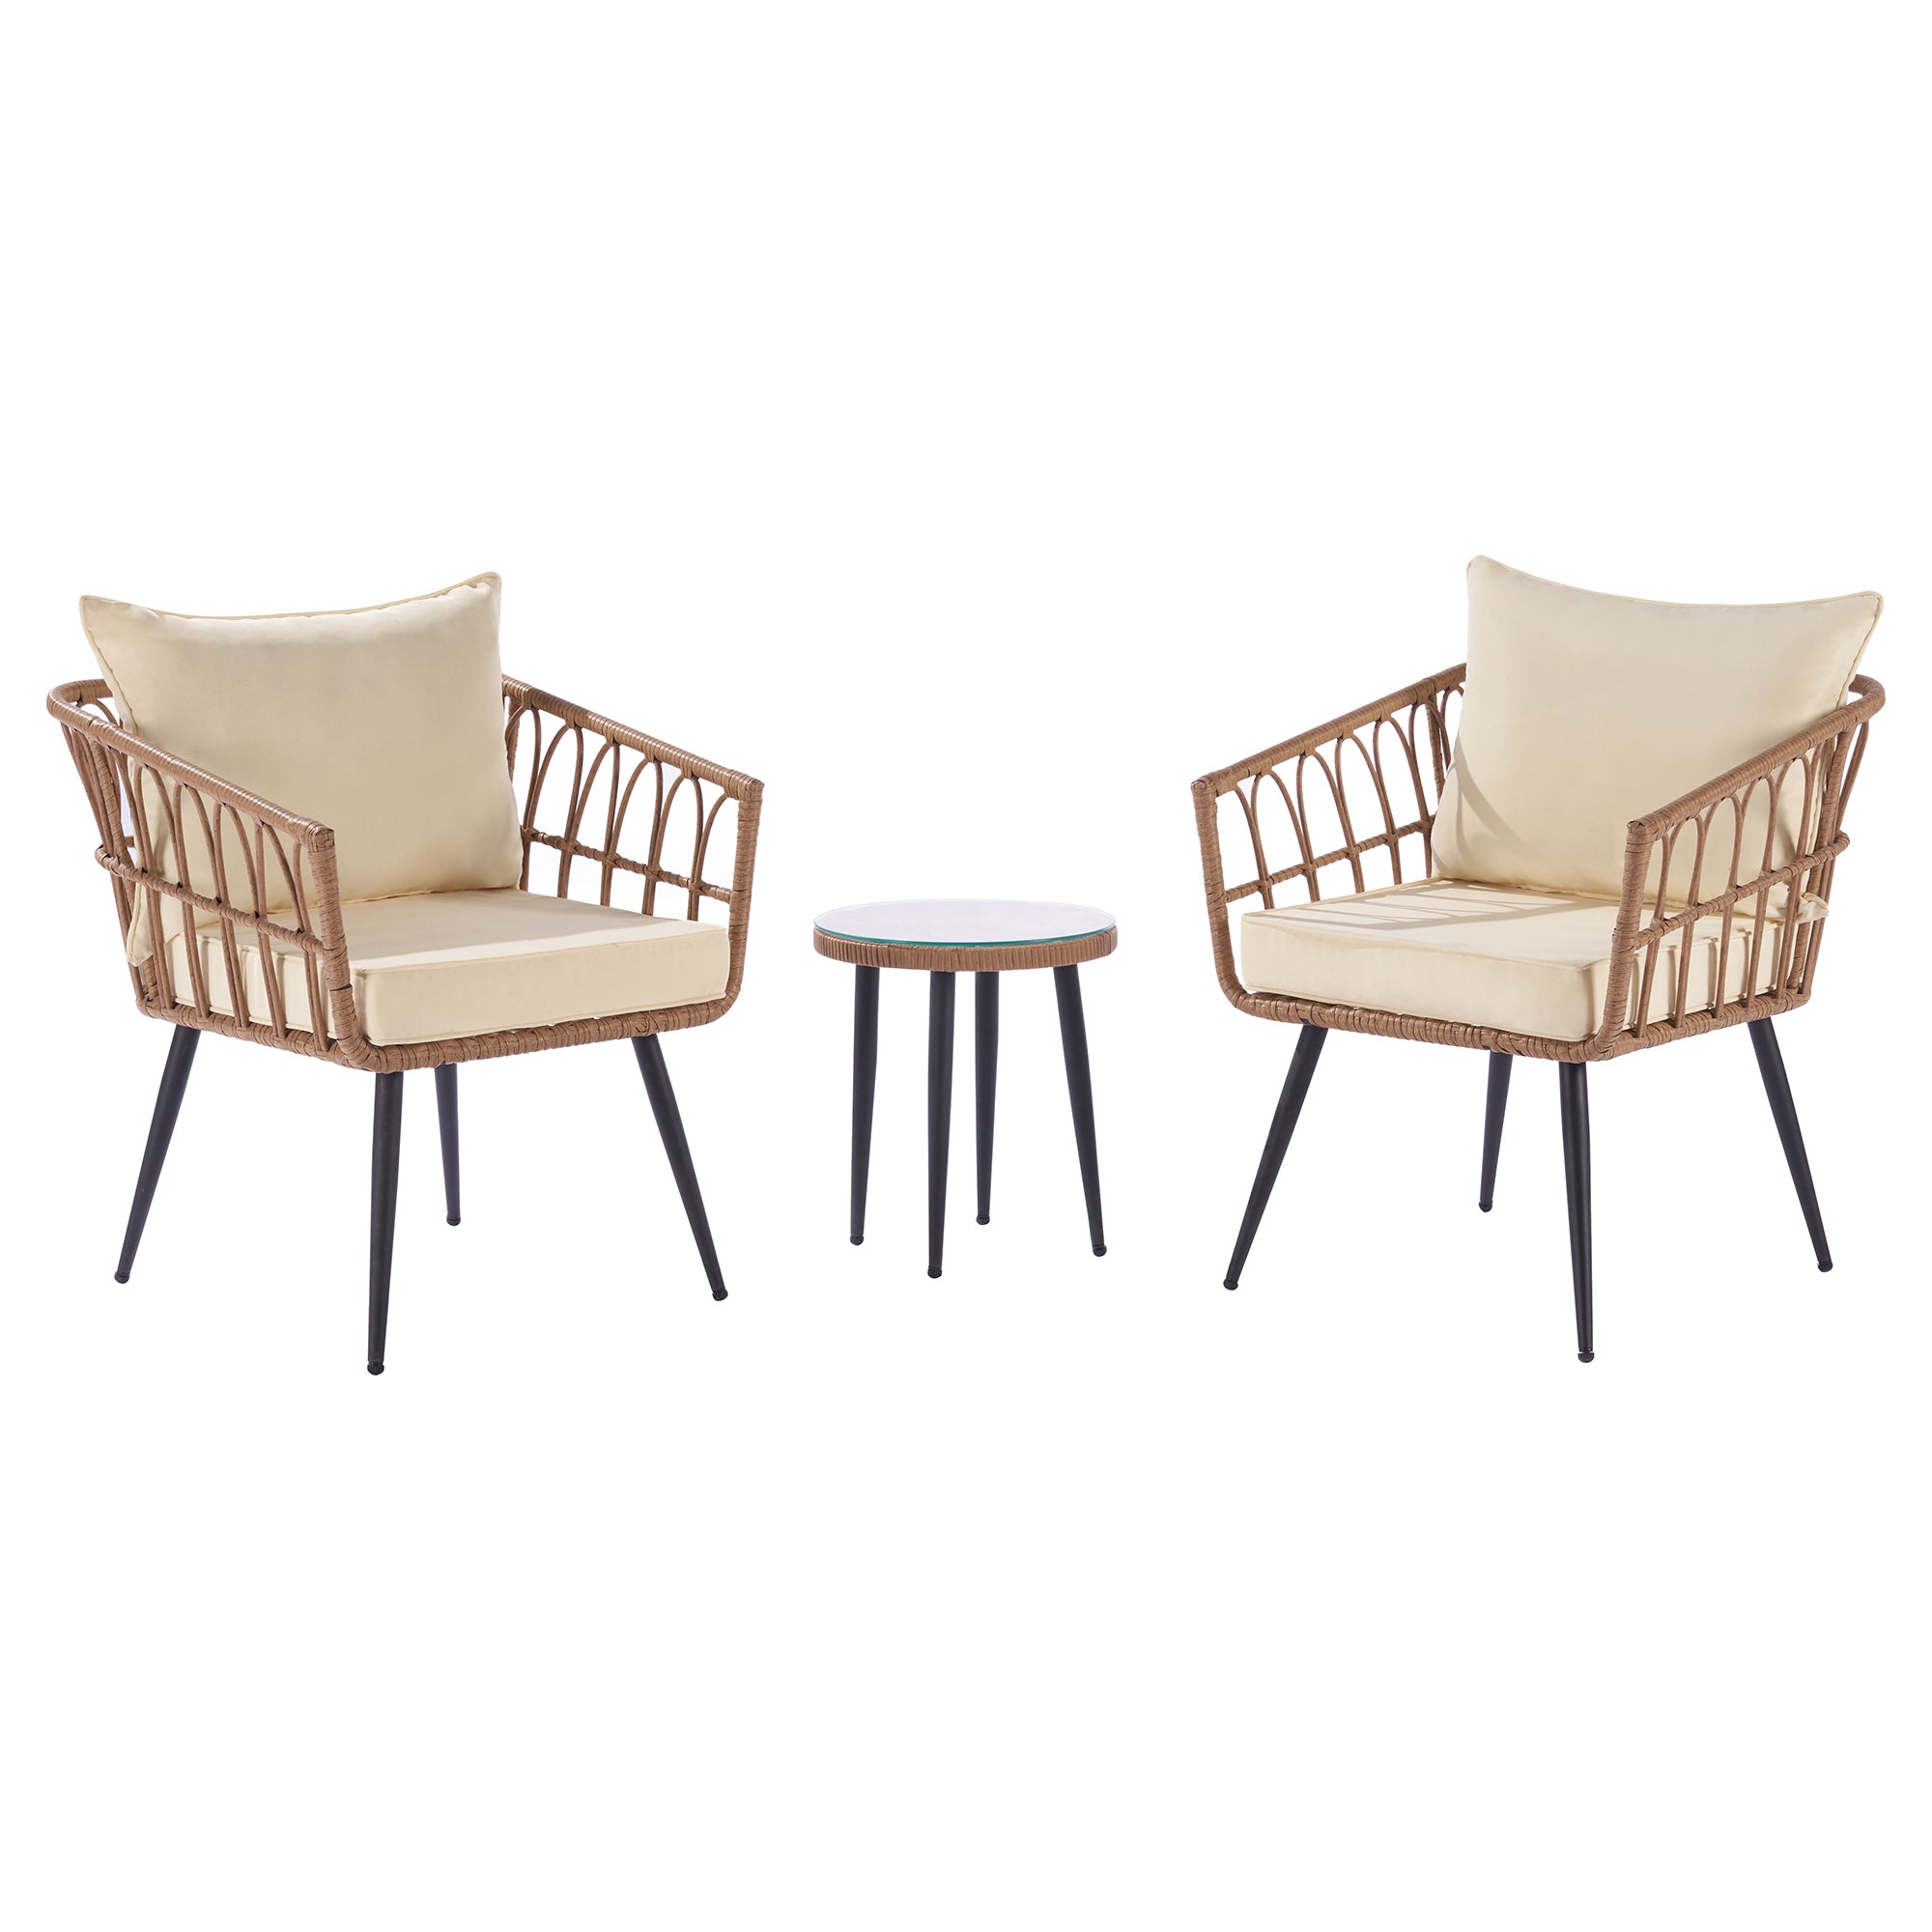 3 Pieces Patio Wicker Chair Set with Beige Cushions